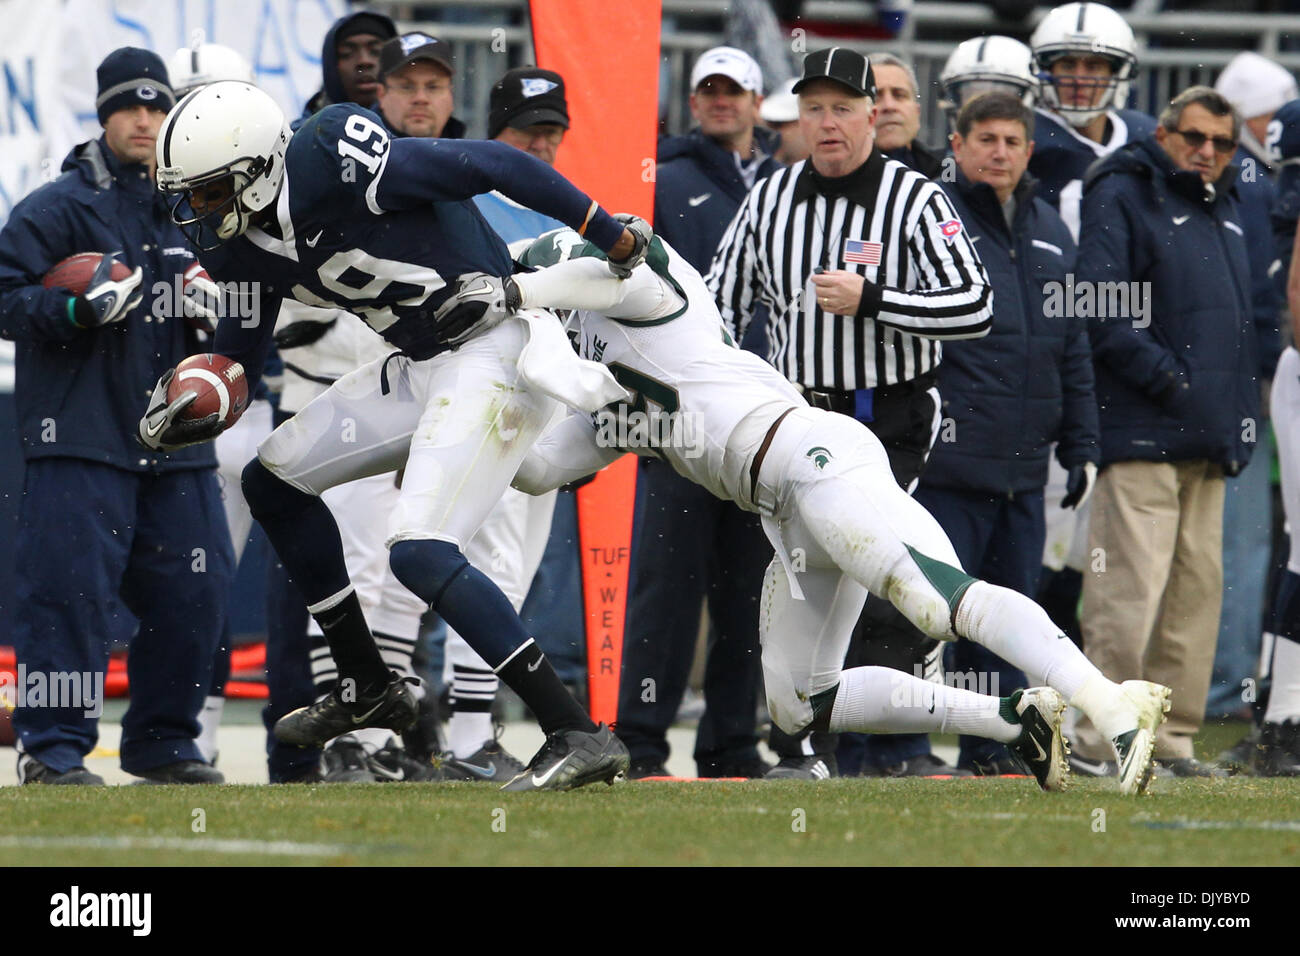 Nov. 27, 2010 - University Park, Pennsylvania, United States of America - Penn State Nittany Lions wide receiver Justin Brown (19) and Michigan State Spartans safety Trenton Robinson (39) during game action at Beaver Stadium in University Park, Pennsylvania. (Credit Image: © Alex Cena/Southcreek Global/ZUMAPRESS.com) Stock Photo